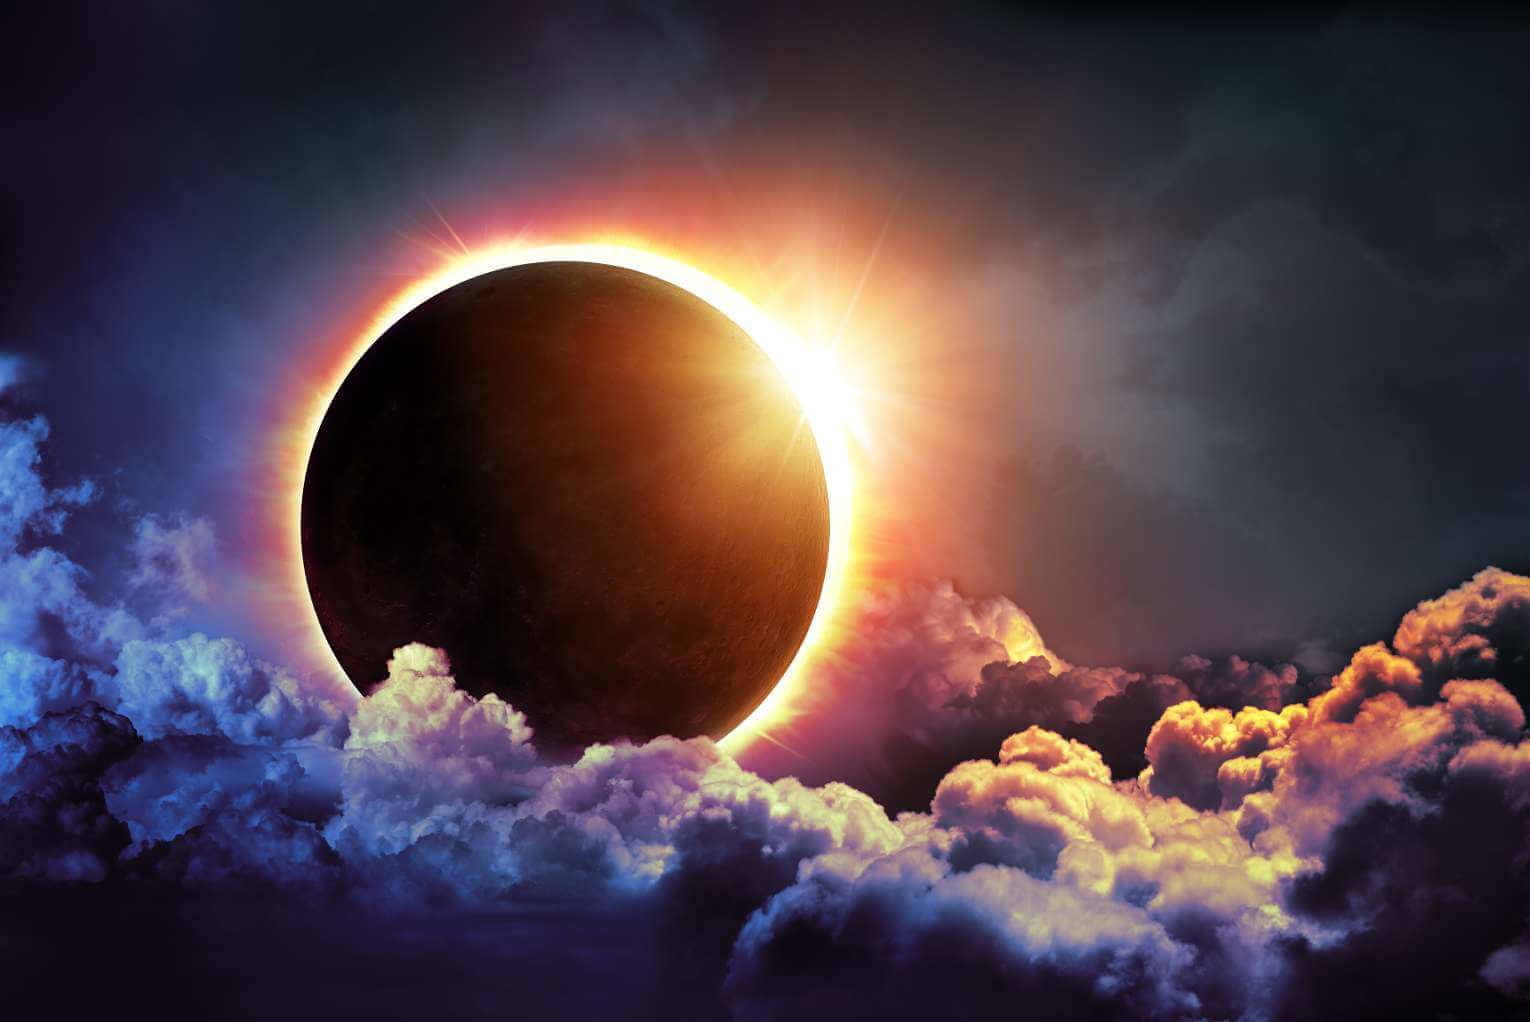 Solar Eclipse Is Proof of a Loving Creator